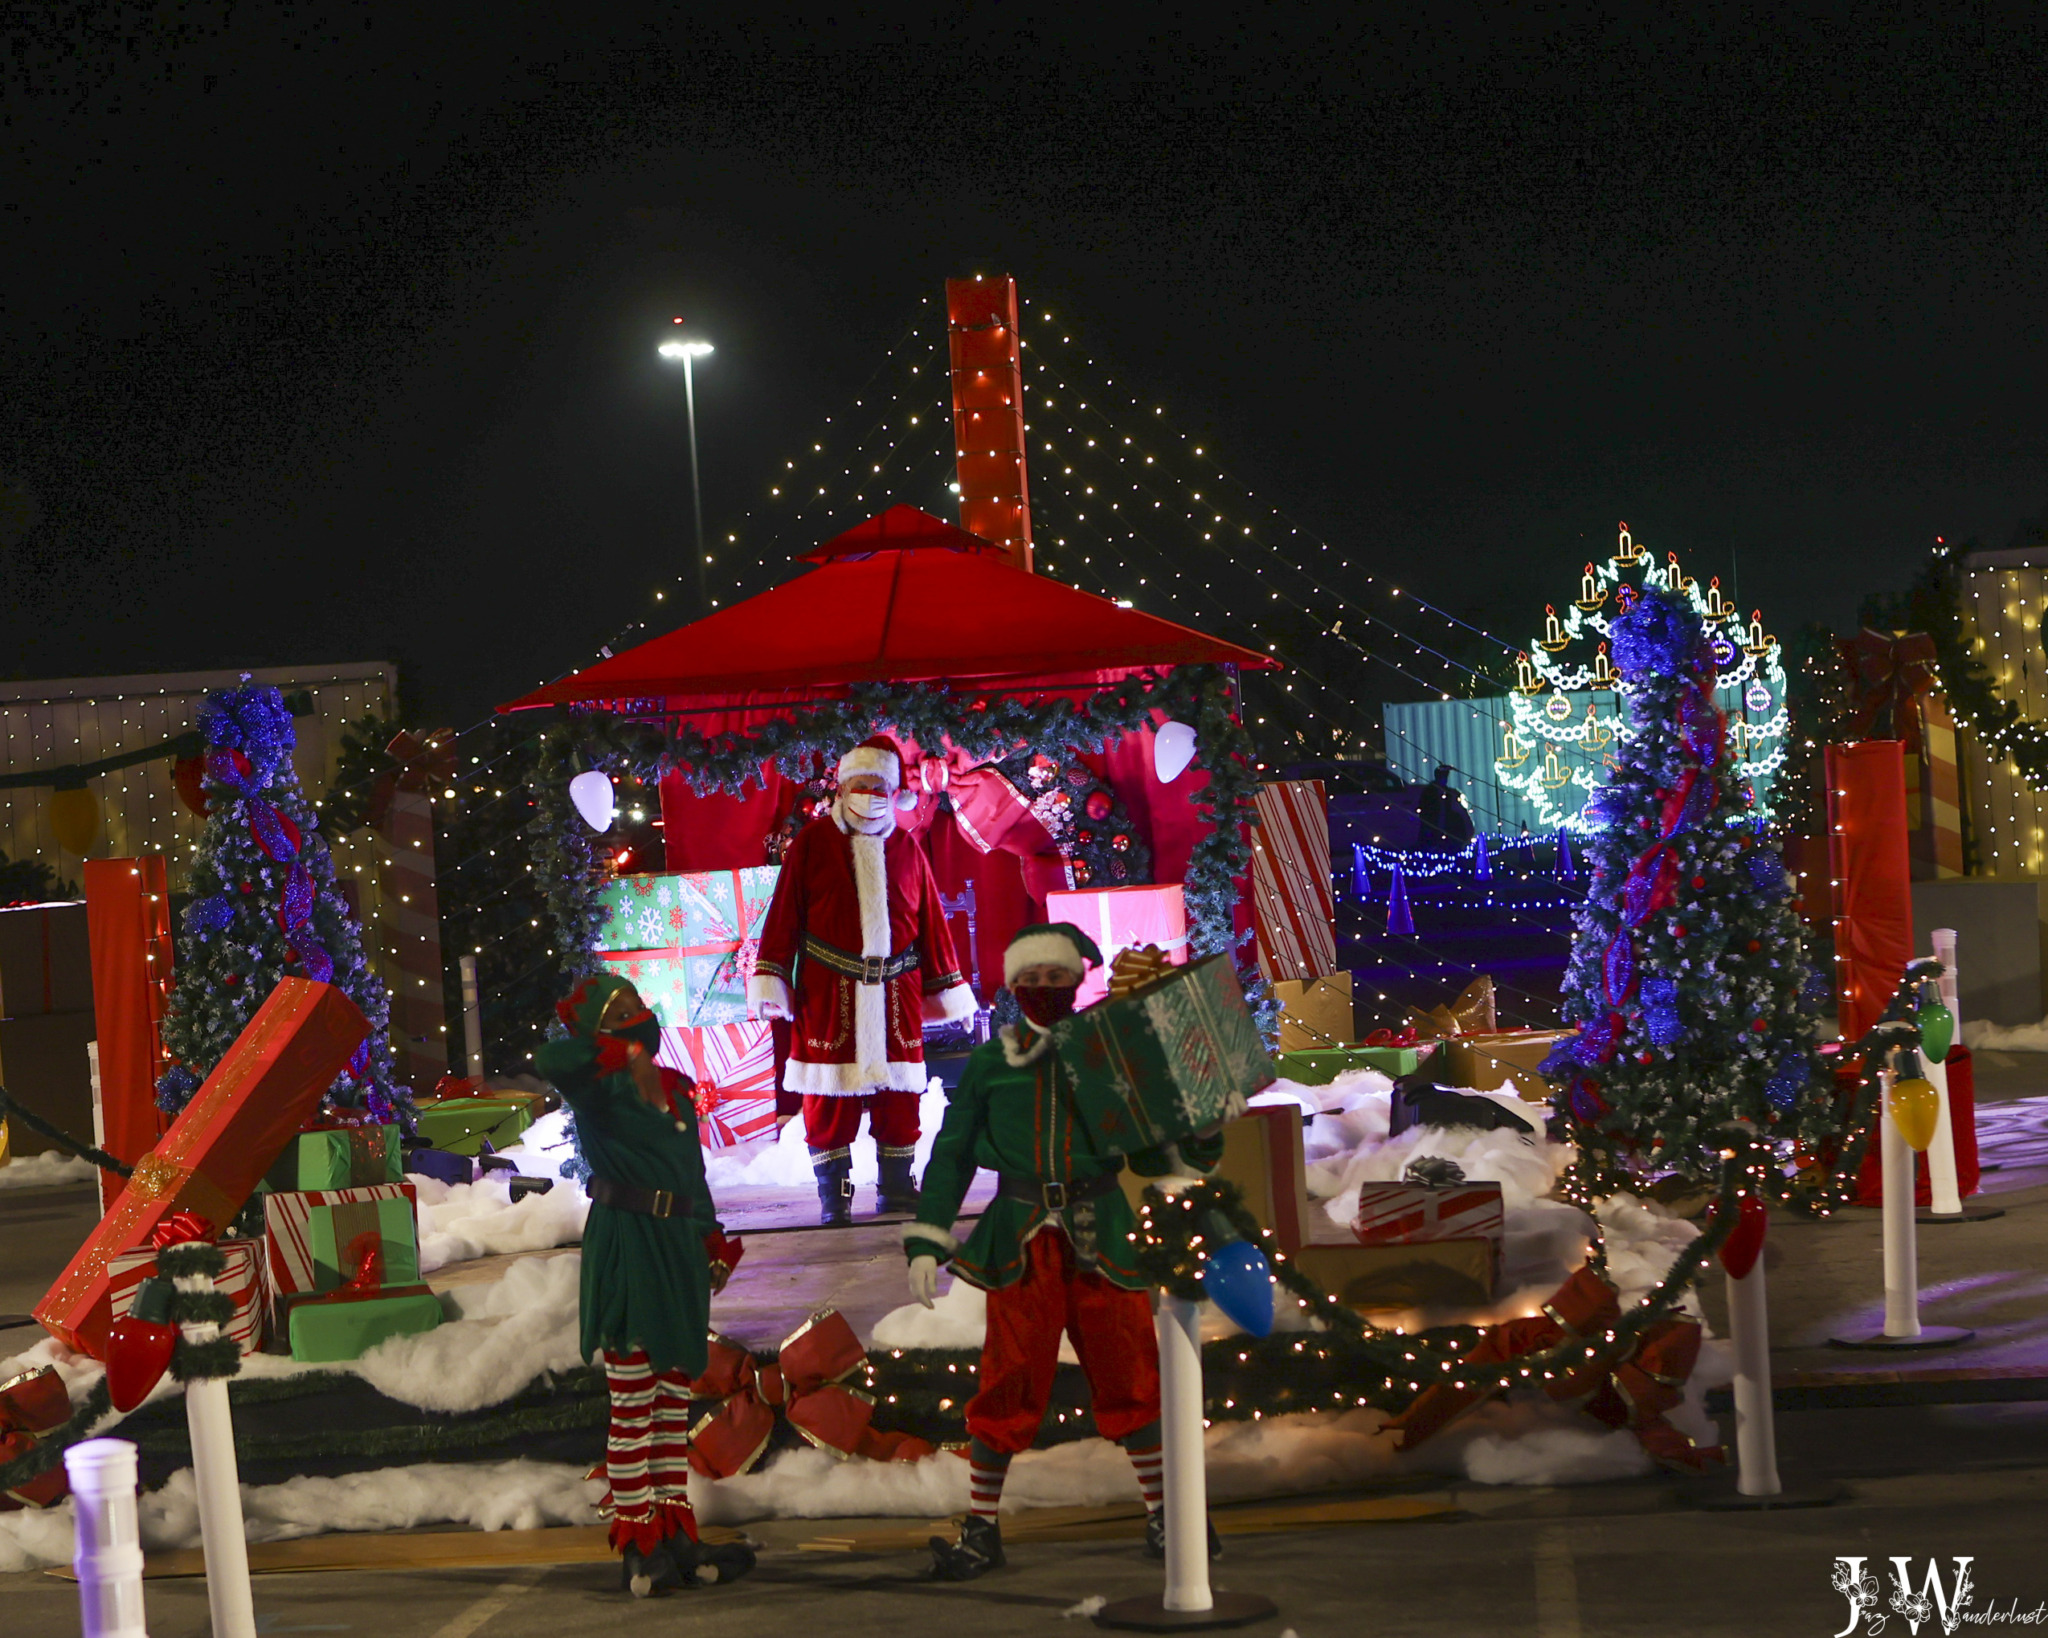 Holiday celebration at Night of Lights OC in Costa Mesa. Photography by Jaz Wanderlust.